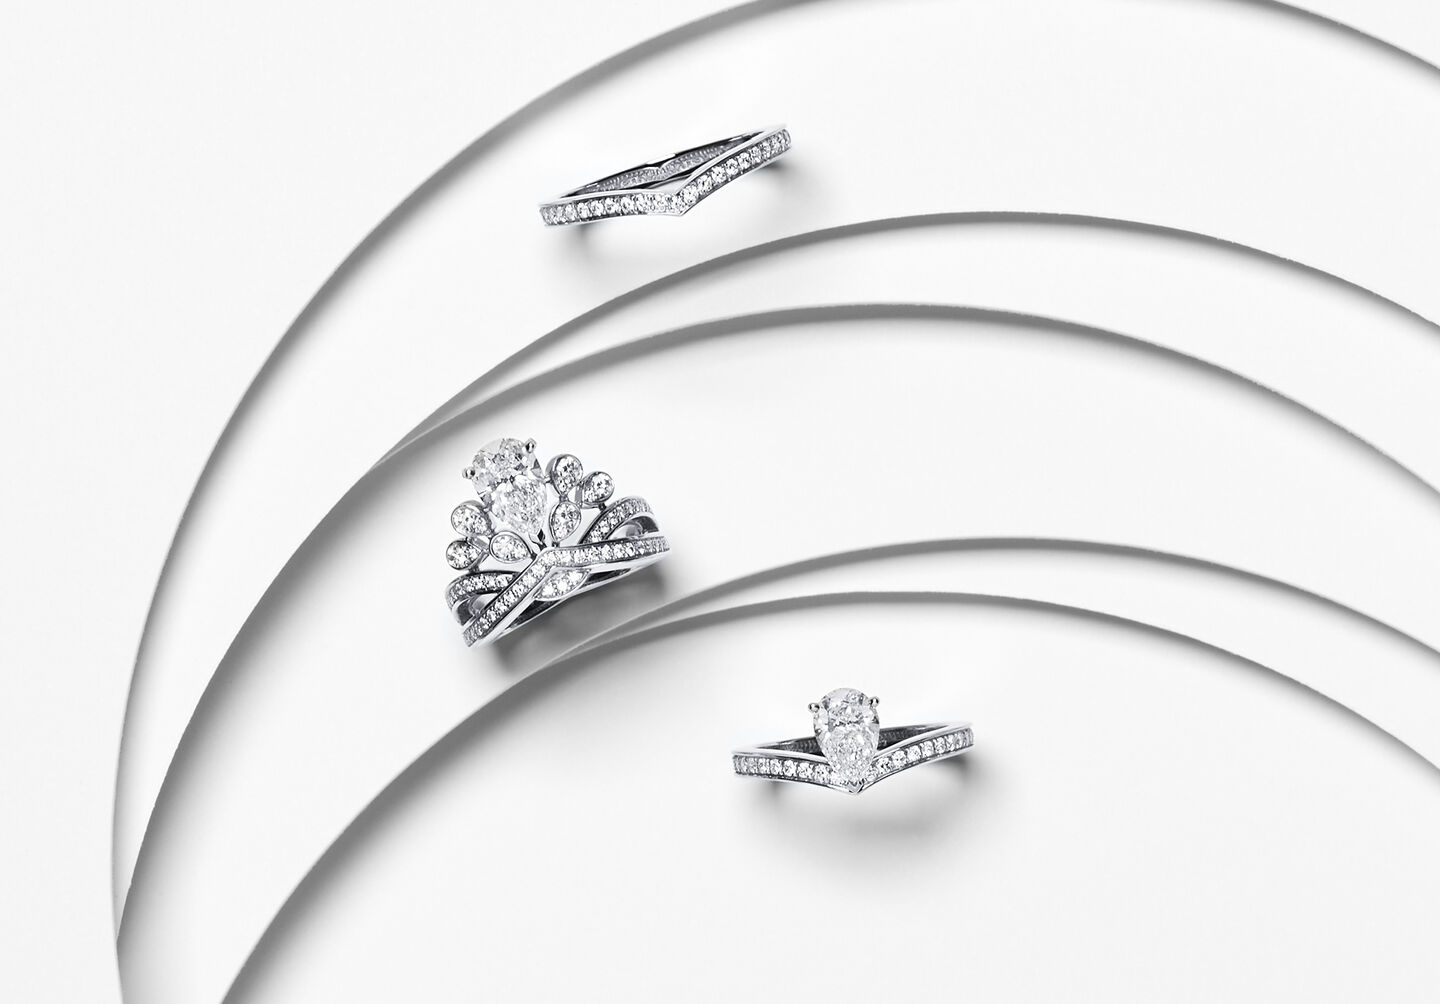 Chaumet bridal jewellery on a white background